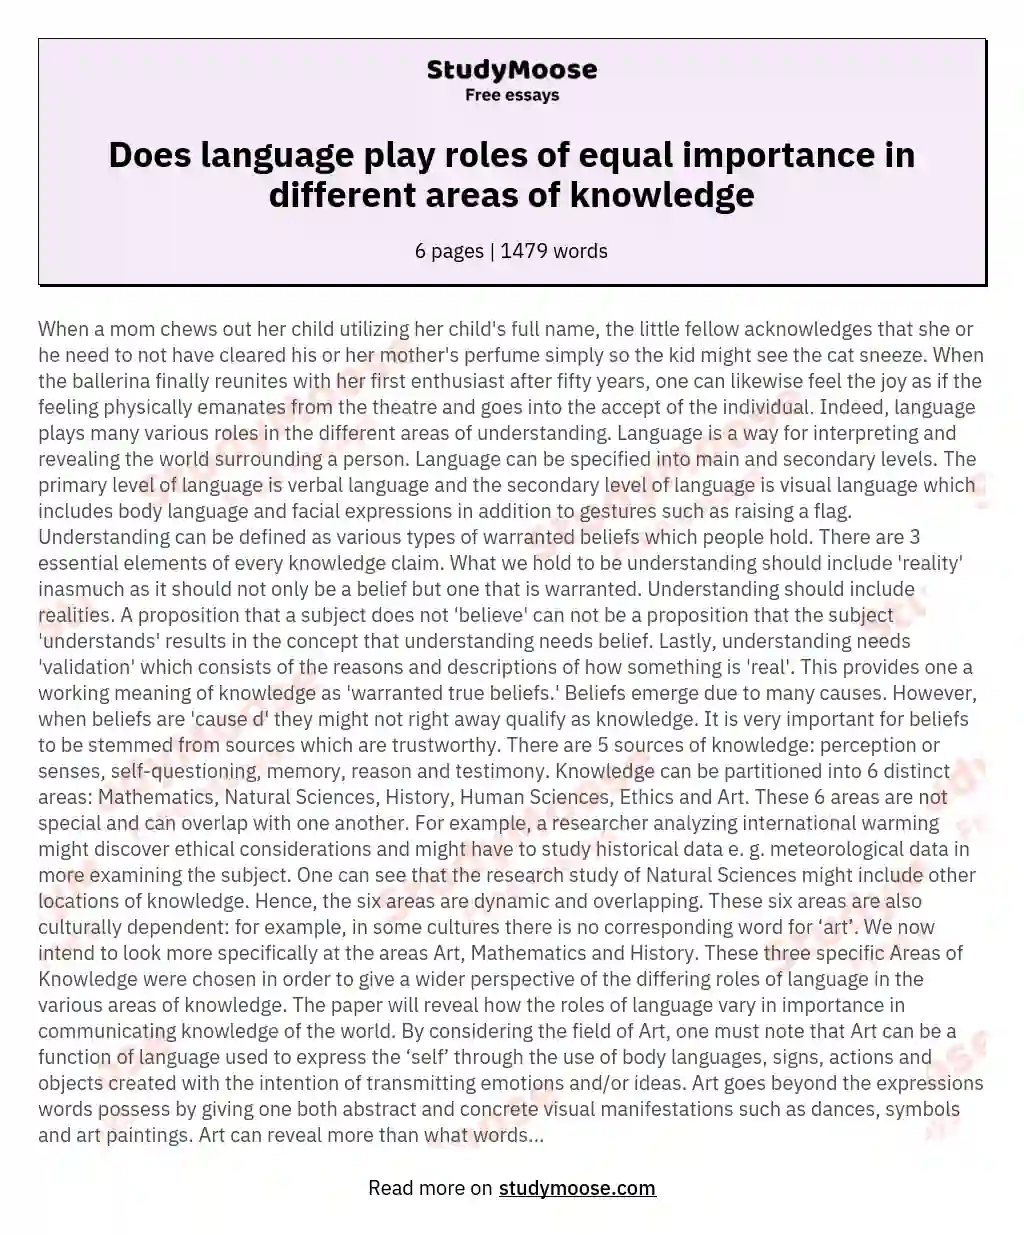 Does language play roles of equal importance in different areas of knowledge essay